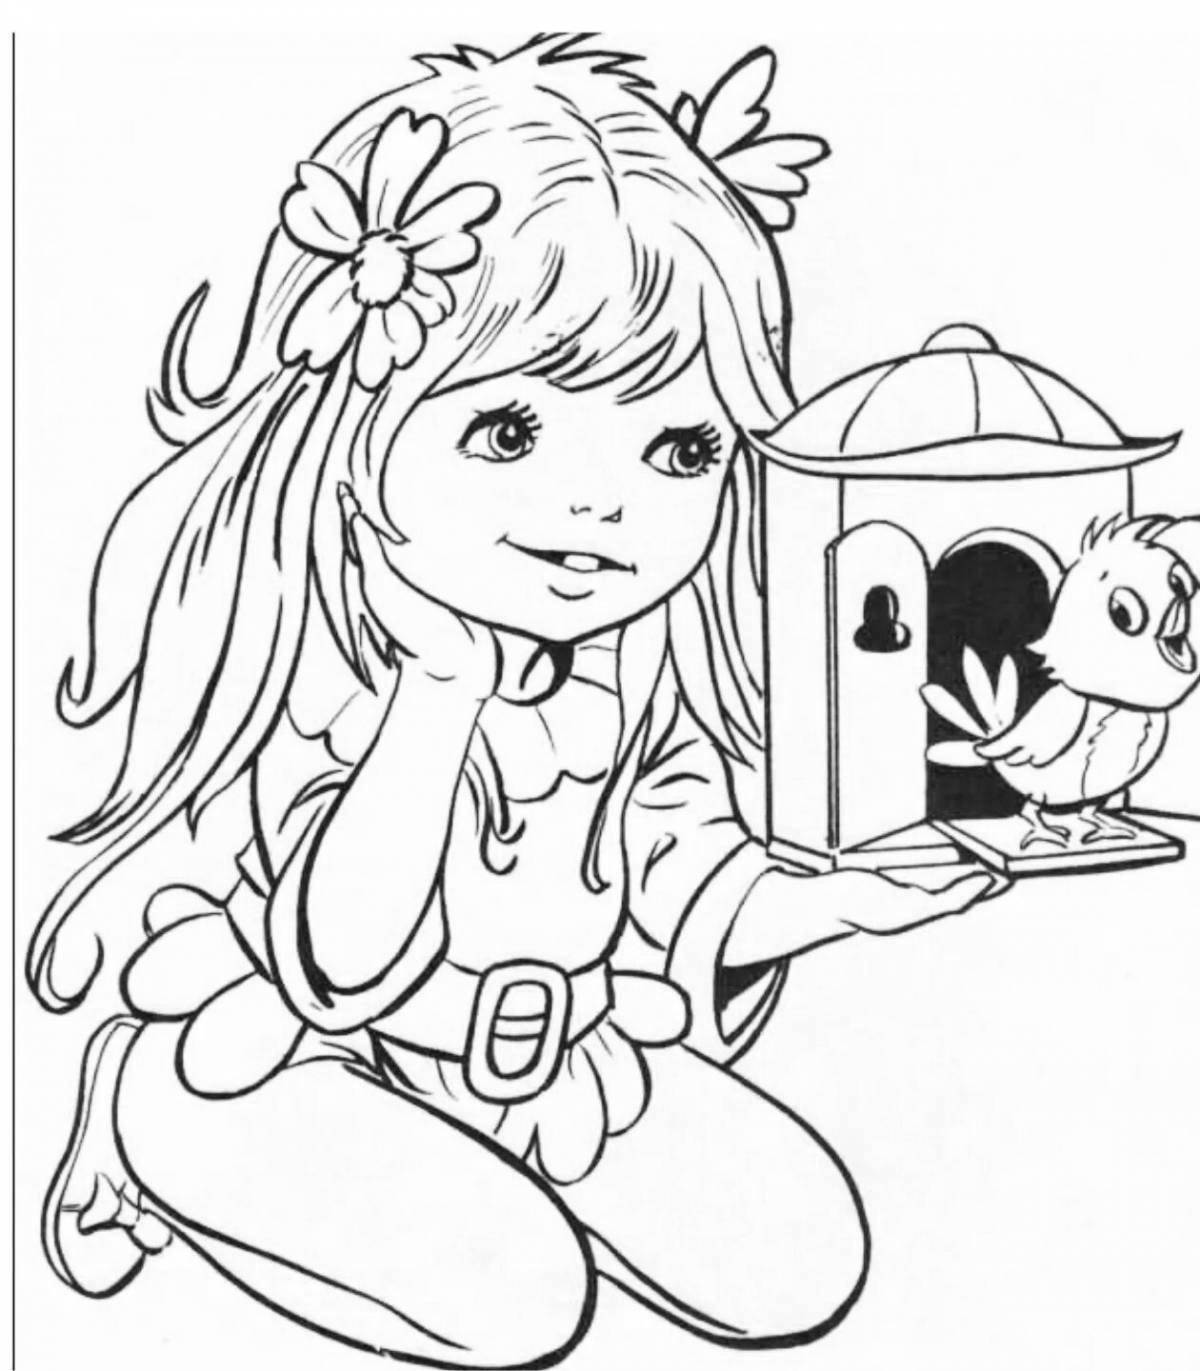 Charming coloring book for girls grade 2